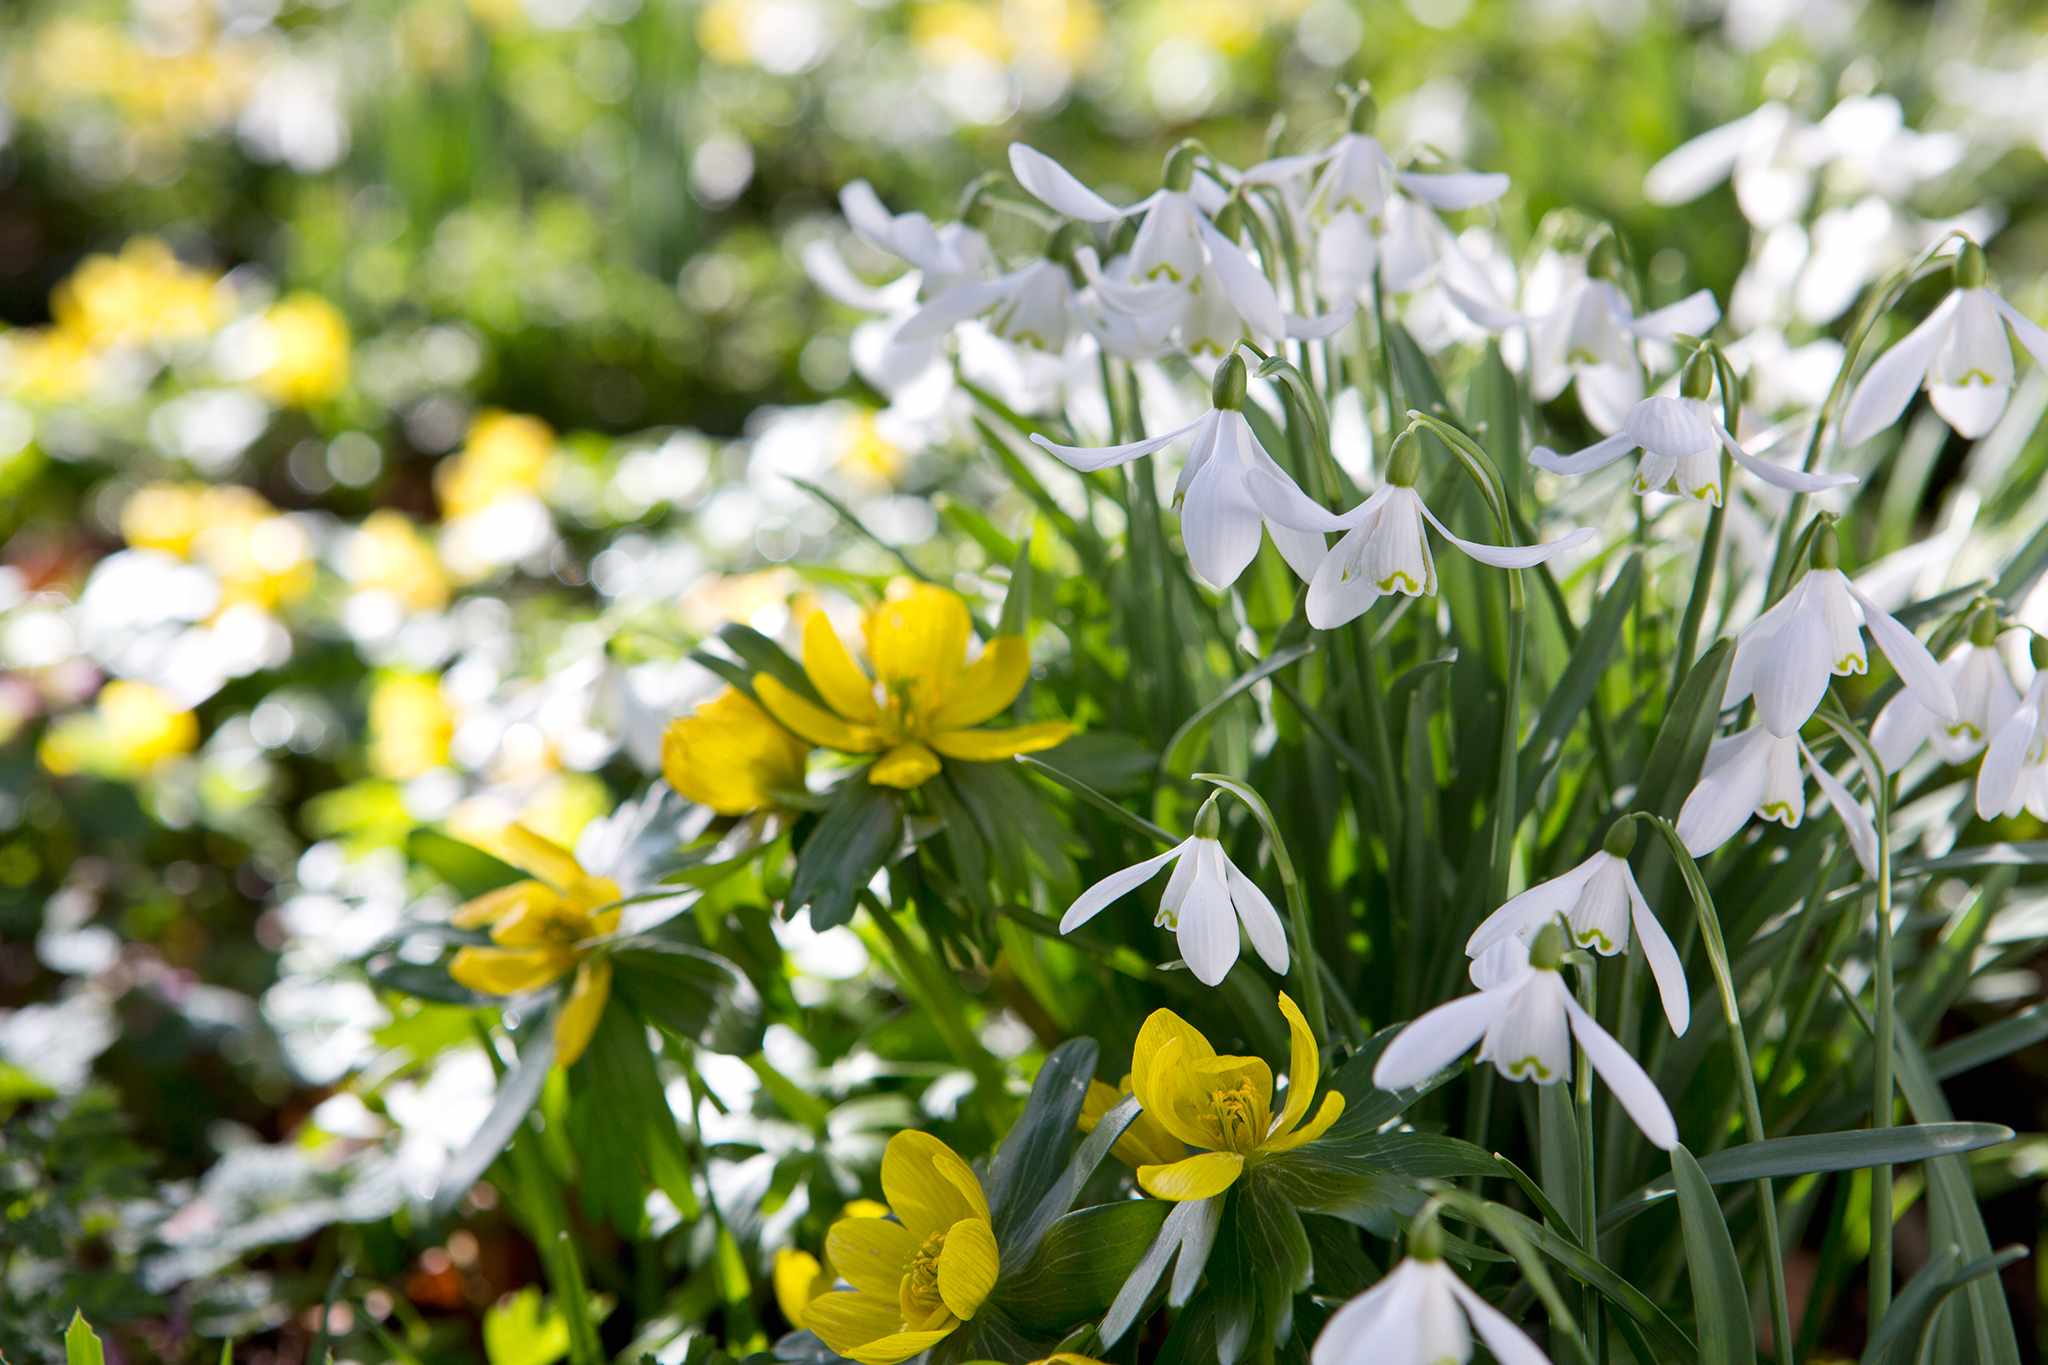 Snowdrops and winter aconites